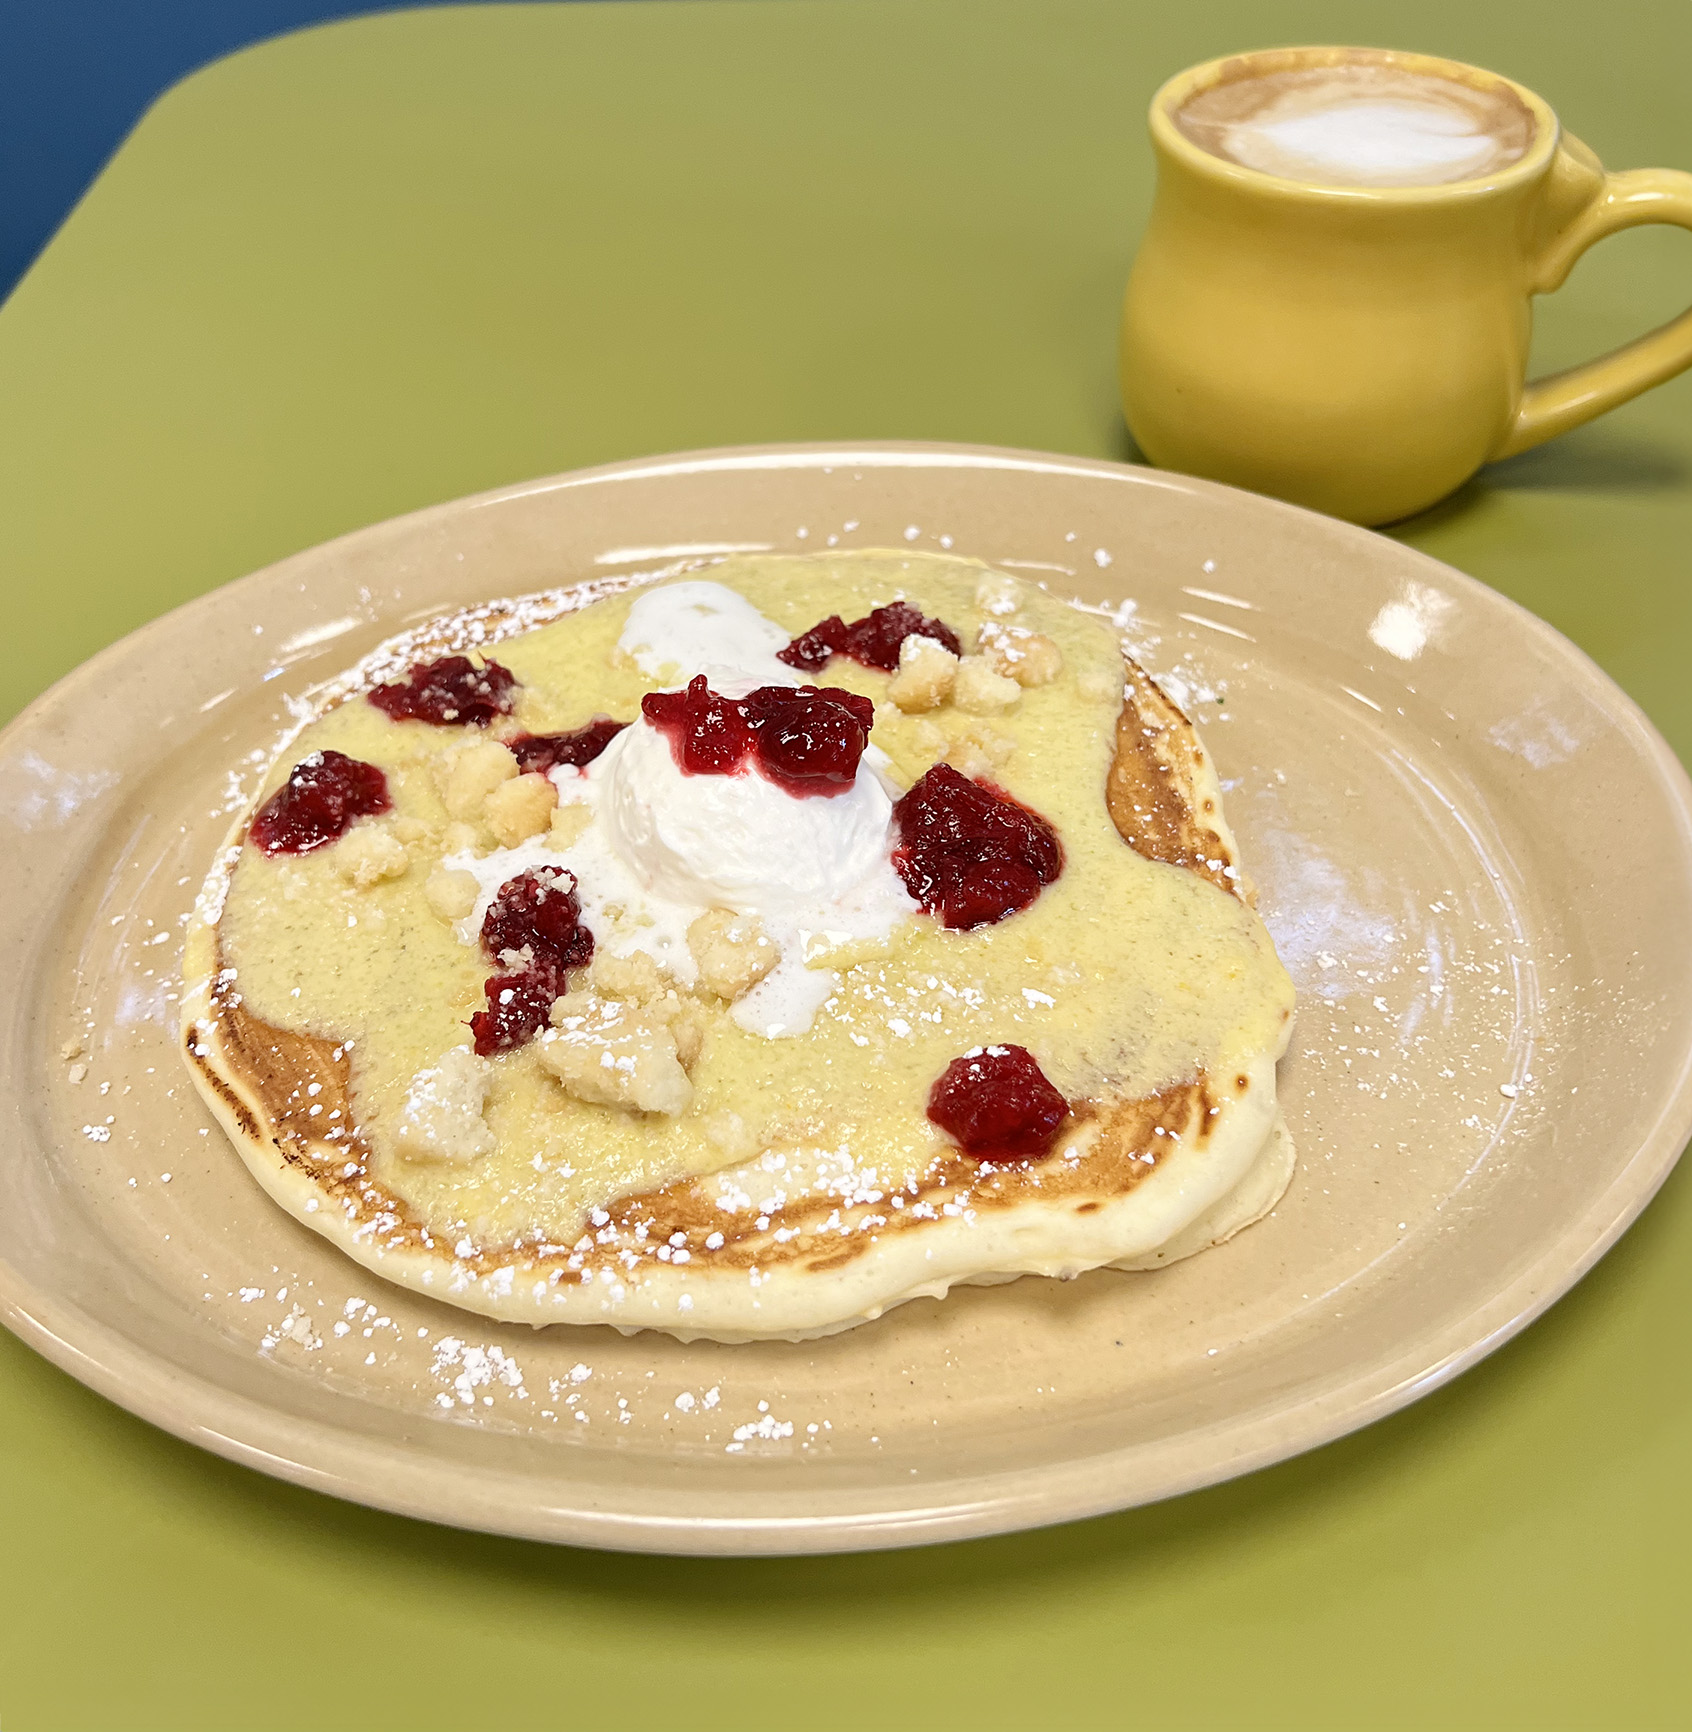 Pancake of the Week: Cranberry Orange Buttermilk Batter with orange custard and candied cranberries and topped with cranberry mascarpone and shortbread crumbles at Snooze Huntington Beach, California (Photo by Julie Nguyen)